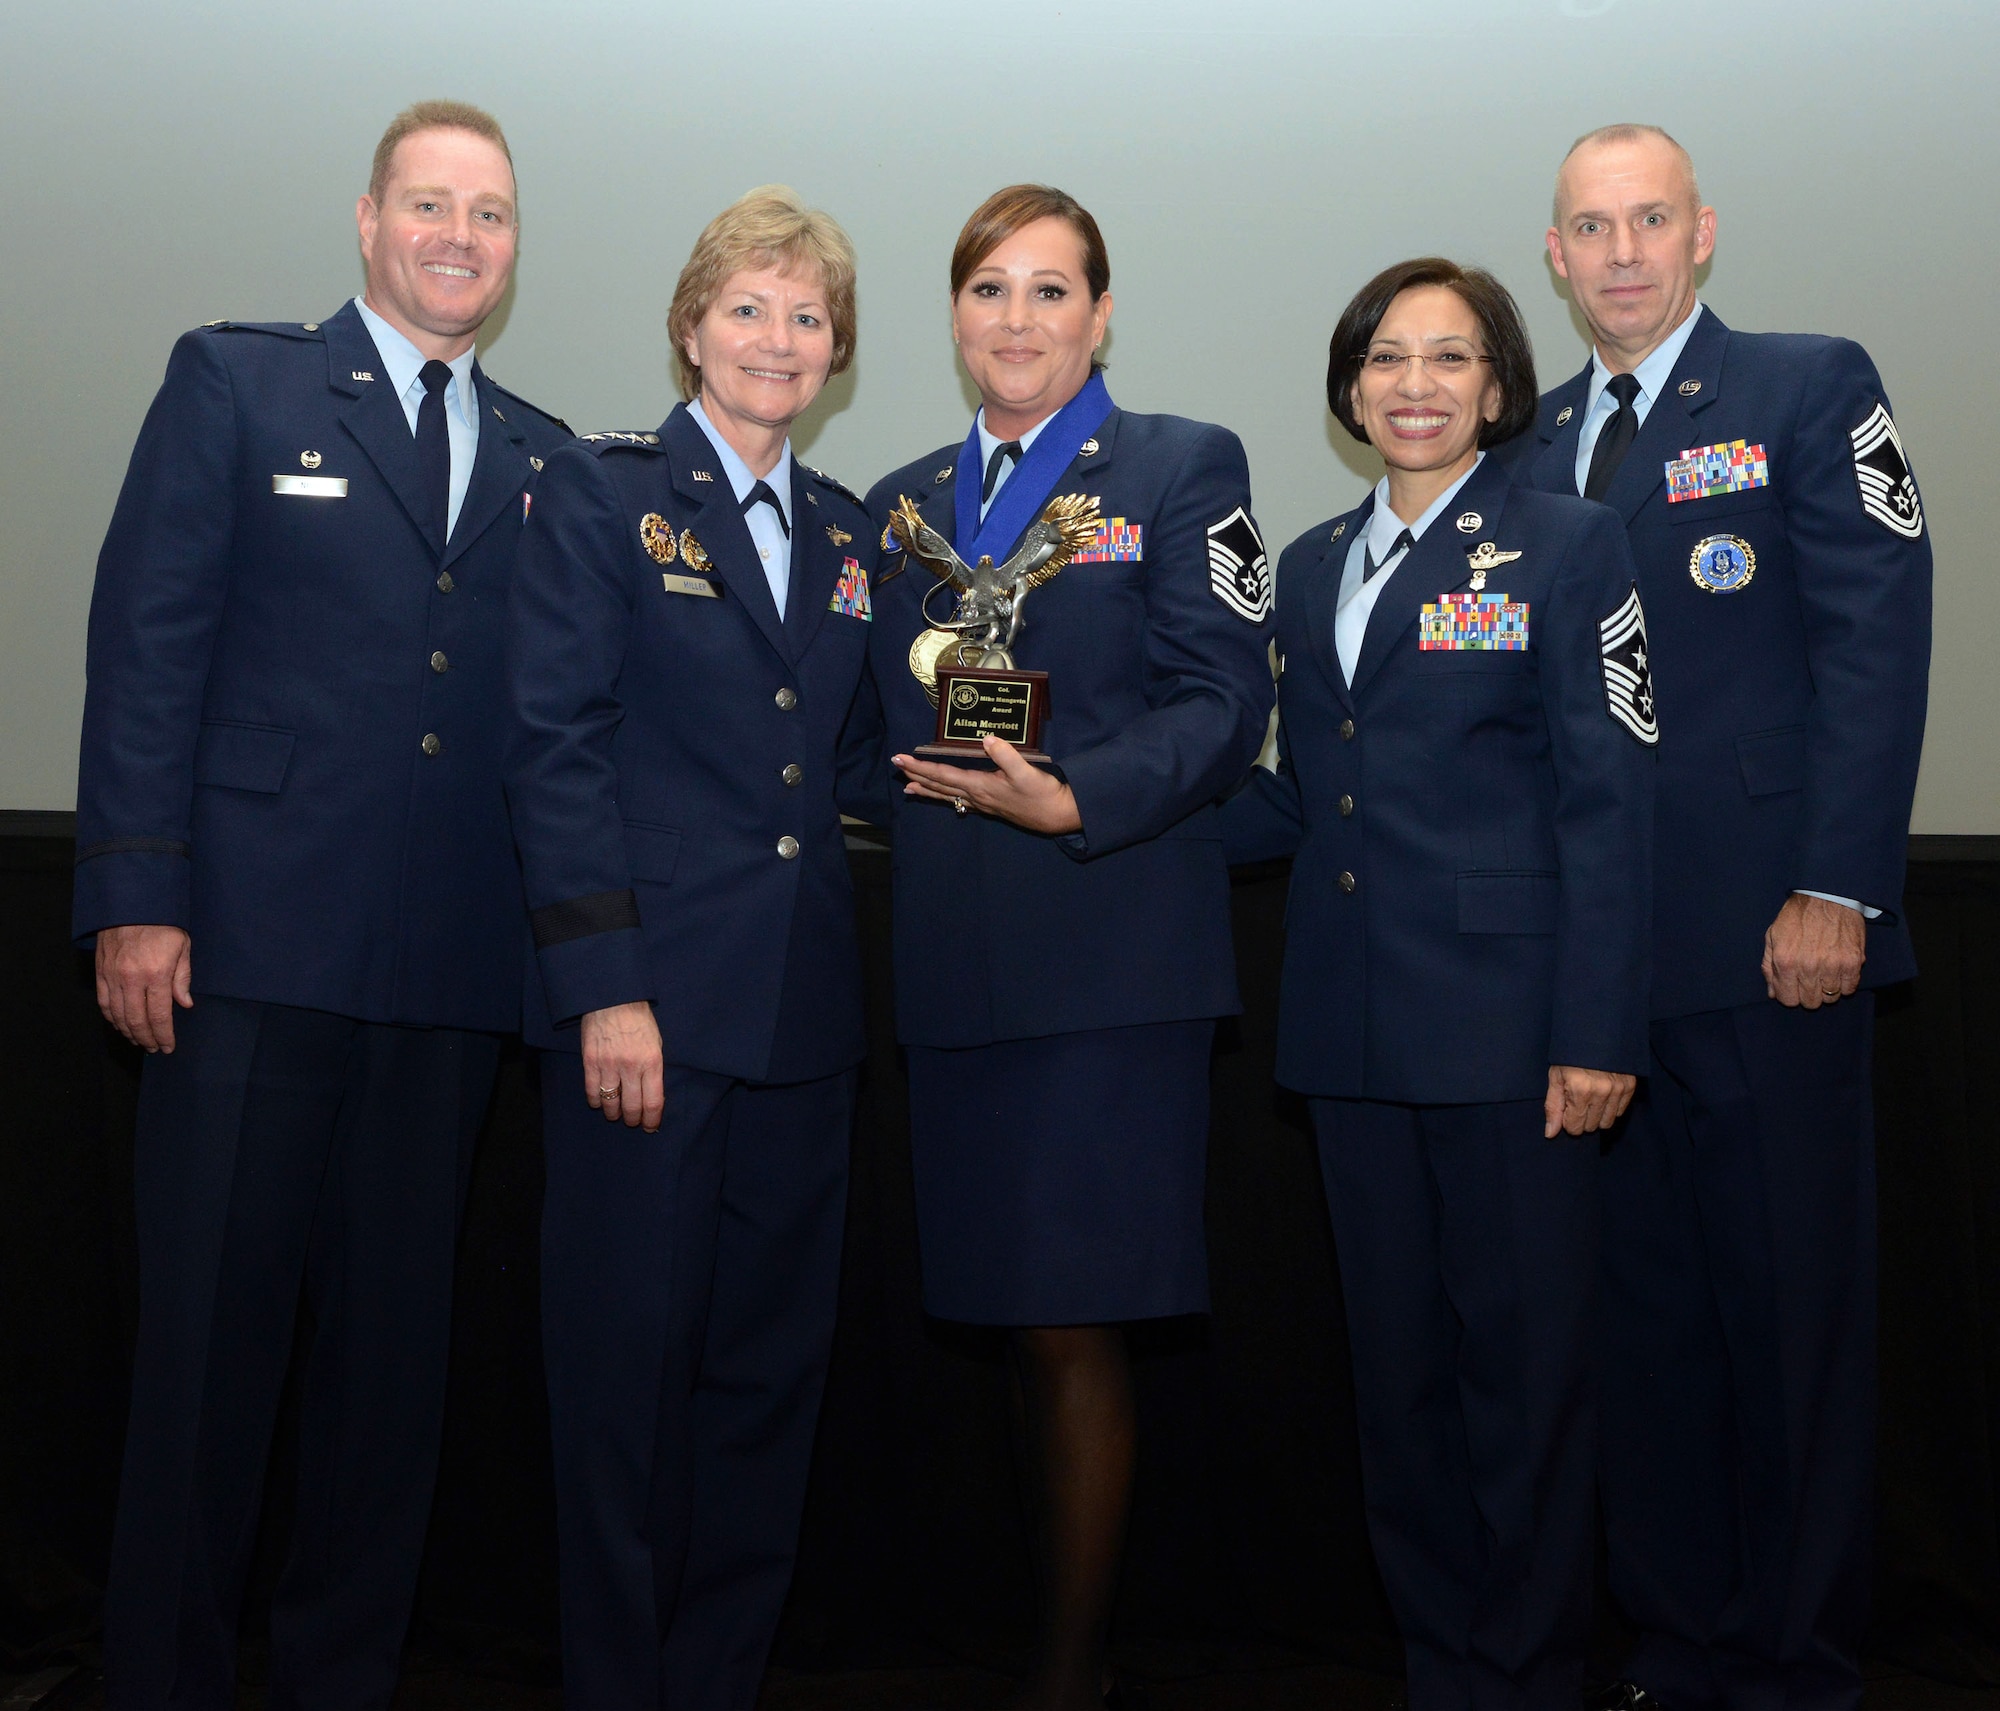 Master Sgt. Alisa Merriott (center) poses with the Col. Mike Mungavin Recruiter of the Year Award with (left to right) Col. Chris Nick, former Recruiting Service commander; Lt. Gen. Maryanne Miller, AFRC commander; Chief Master Sgt. Ericka Kelly, AFRC command chief master sergeant; and Chief Master Sgt. Thomas Zwelling, Recruiting Service superintendent.(U.S. Air Force photo by Master Sgt. Chance Babin)